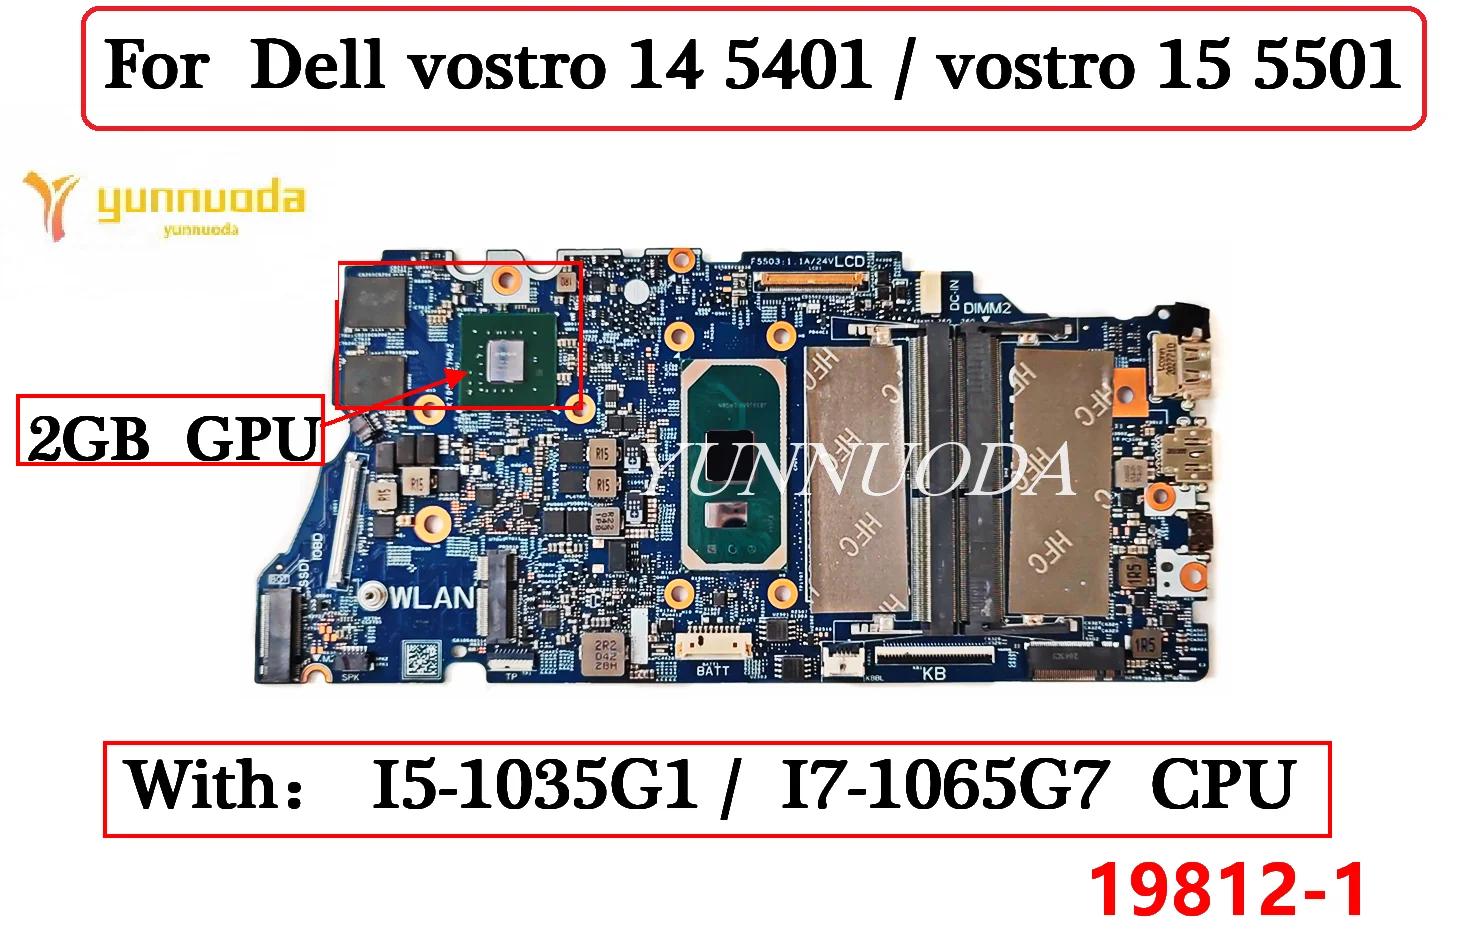 

19812-1 For Dell vostro 14 5401 vostro 15 5501 Laptop Motherboard with i5-1035G1 I7-1065G7 CPU N17S-G3-A1 2g CN-0YWFGV Tested